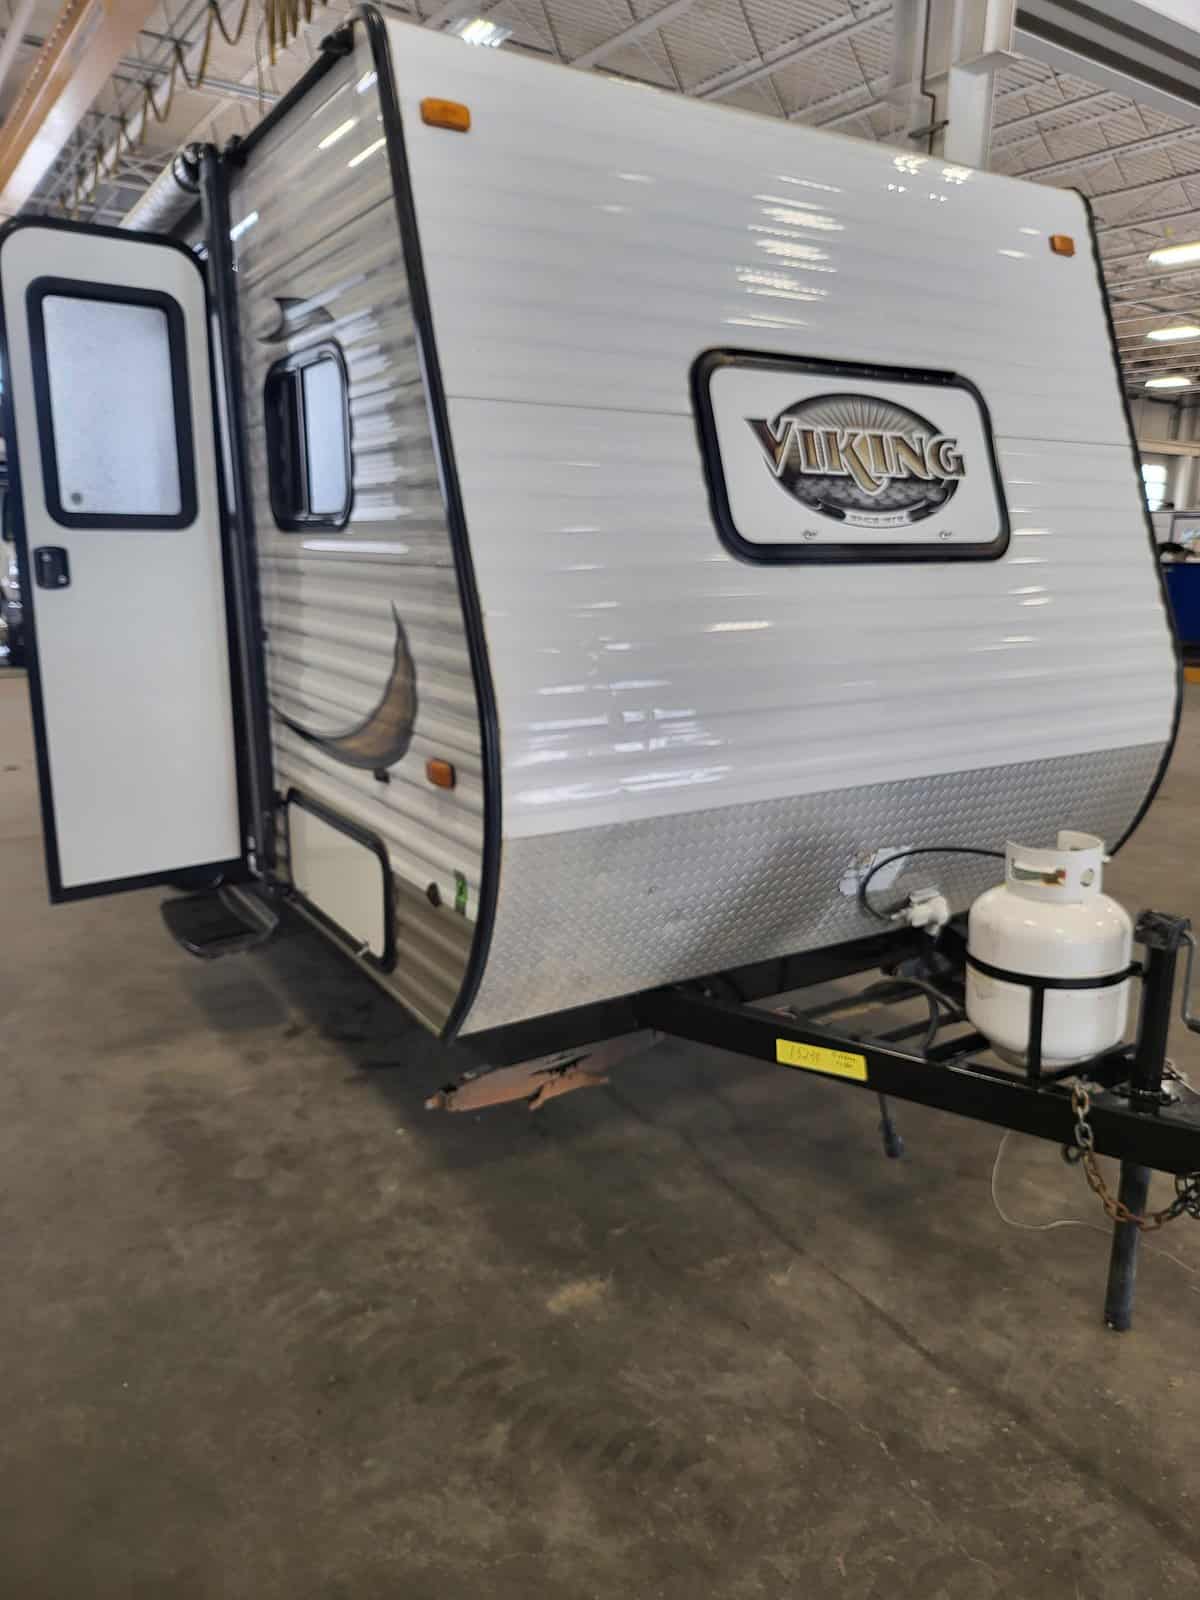 USED 2015 Forest River VIKING 17BH